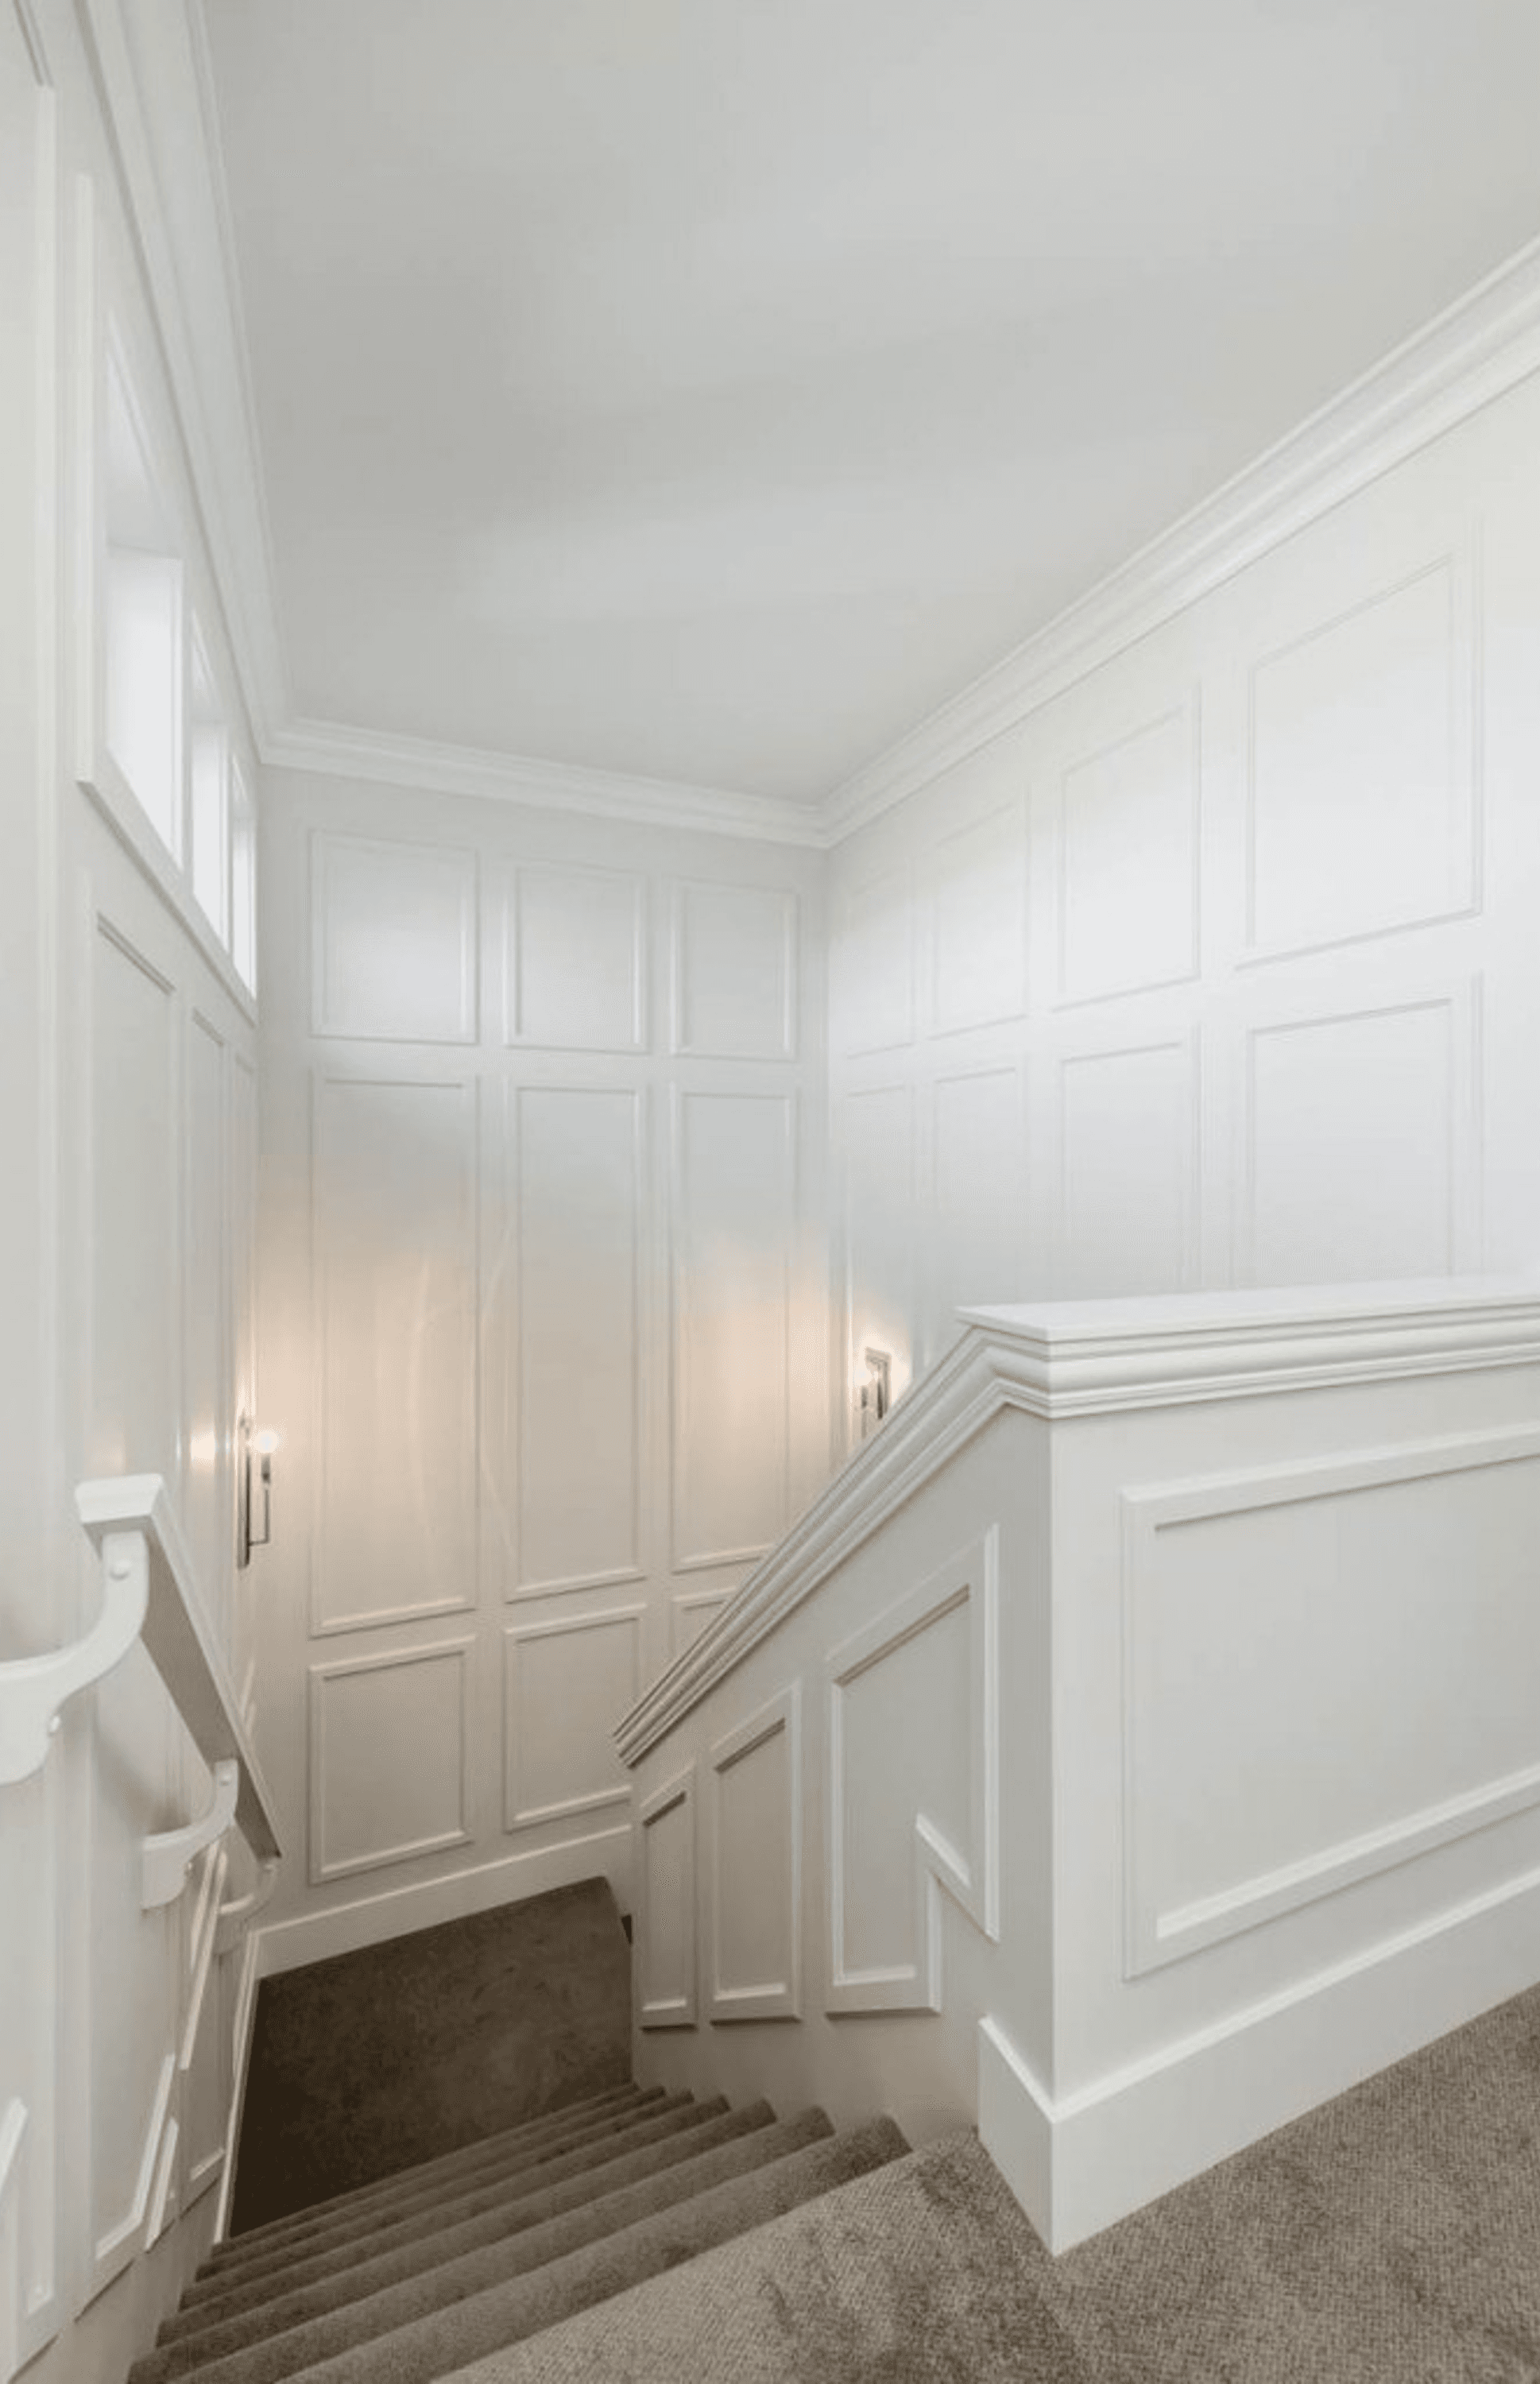 For Blog Only - Maison Design + Build - Panel Staircase